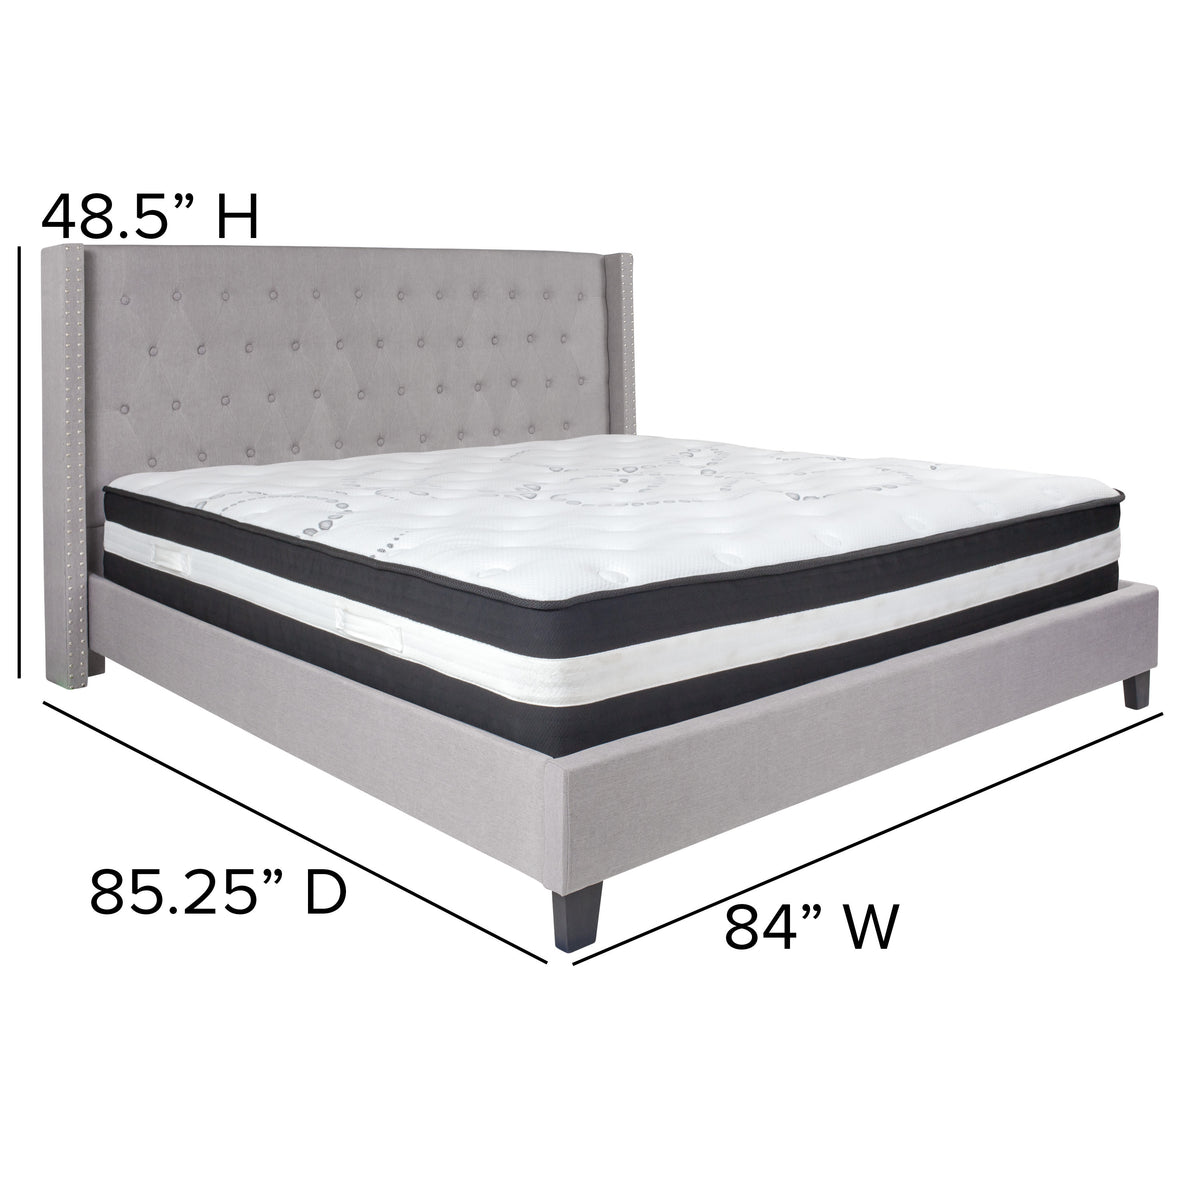 Light Gray,King |#| King Size Tufted Light Gray Fabric Platform Bed with Accent Nail Trim & Mattress